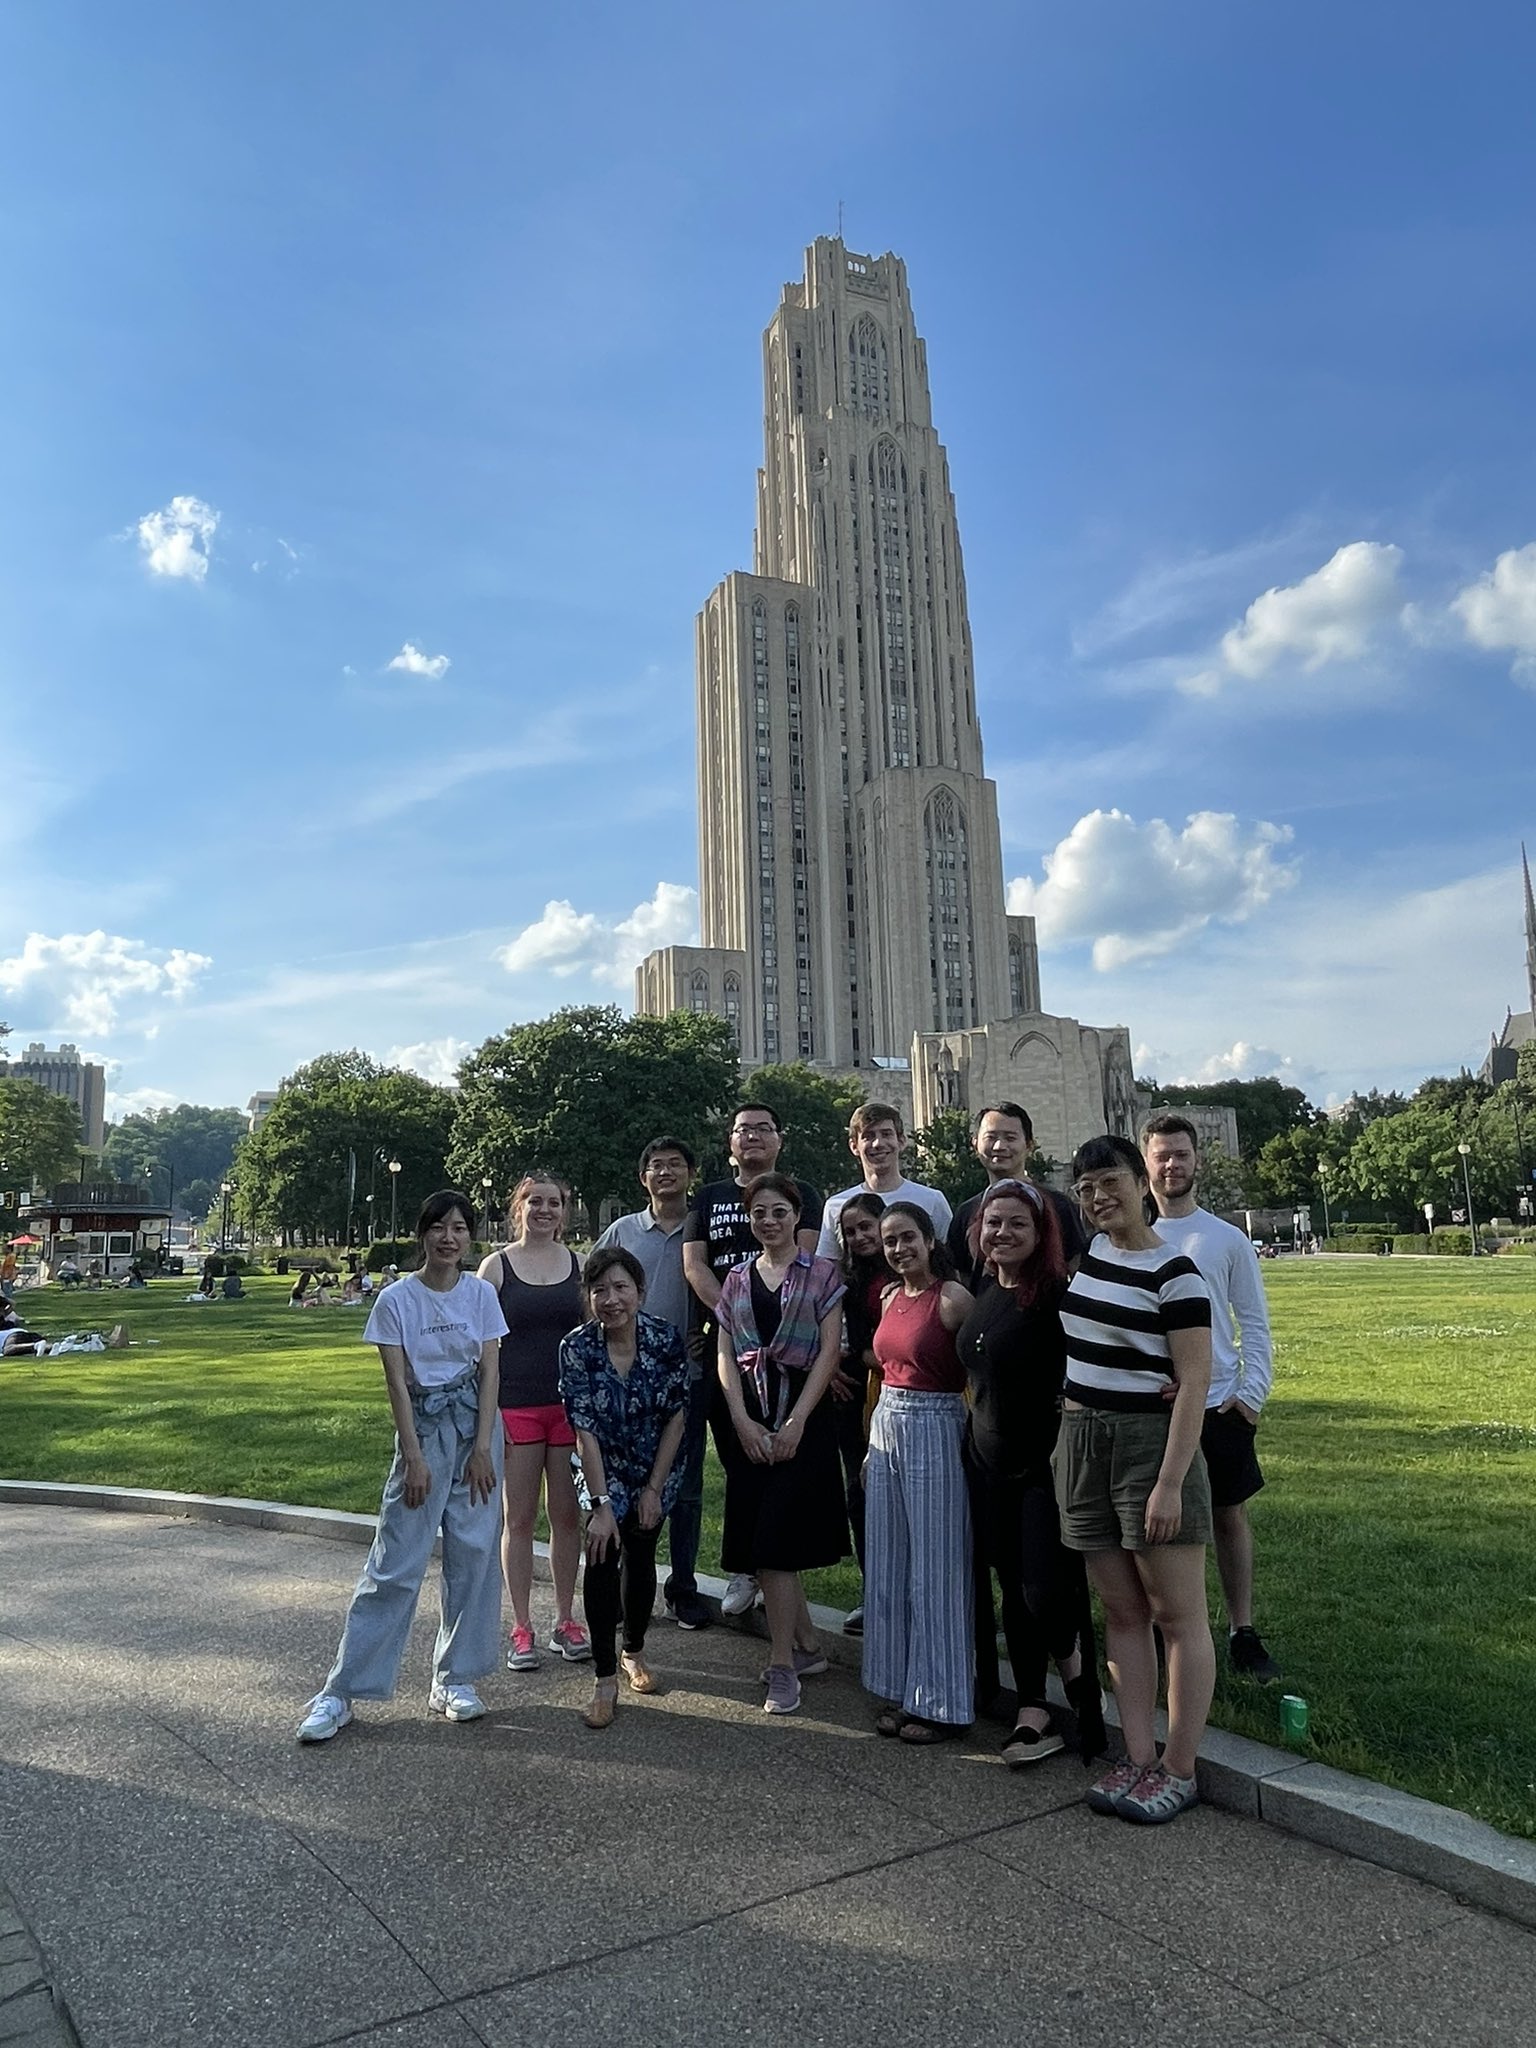 Group photo in front of the cathedral of learning